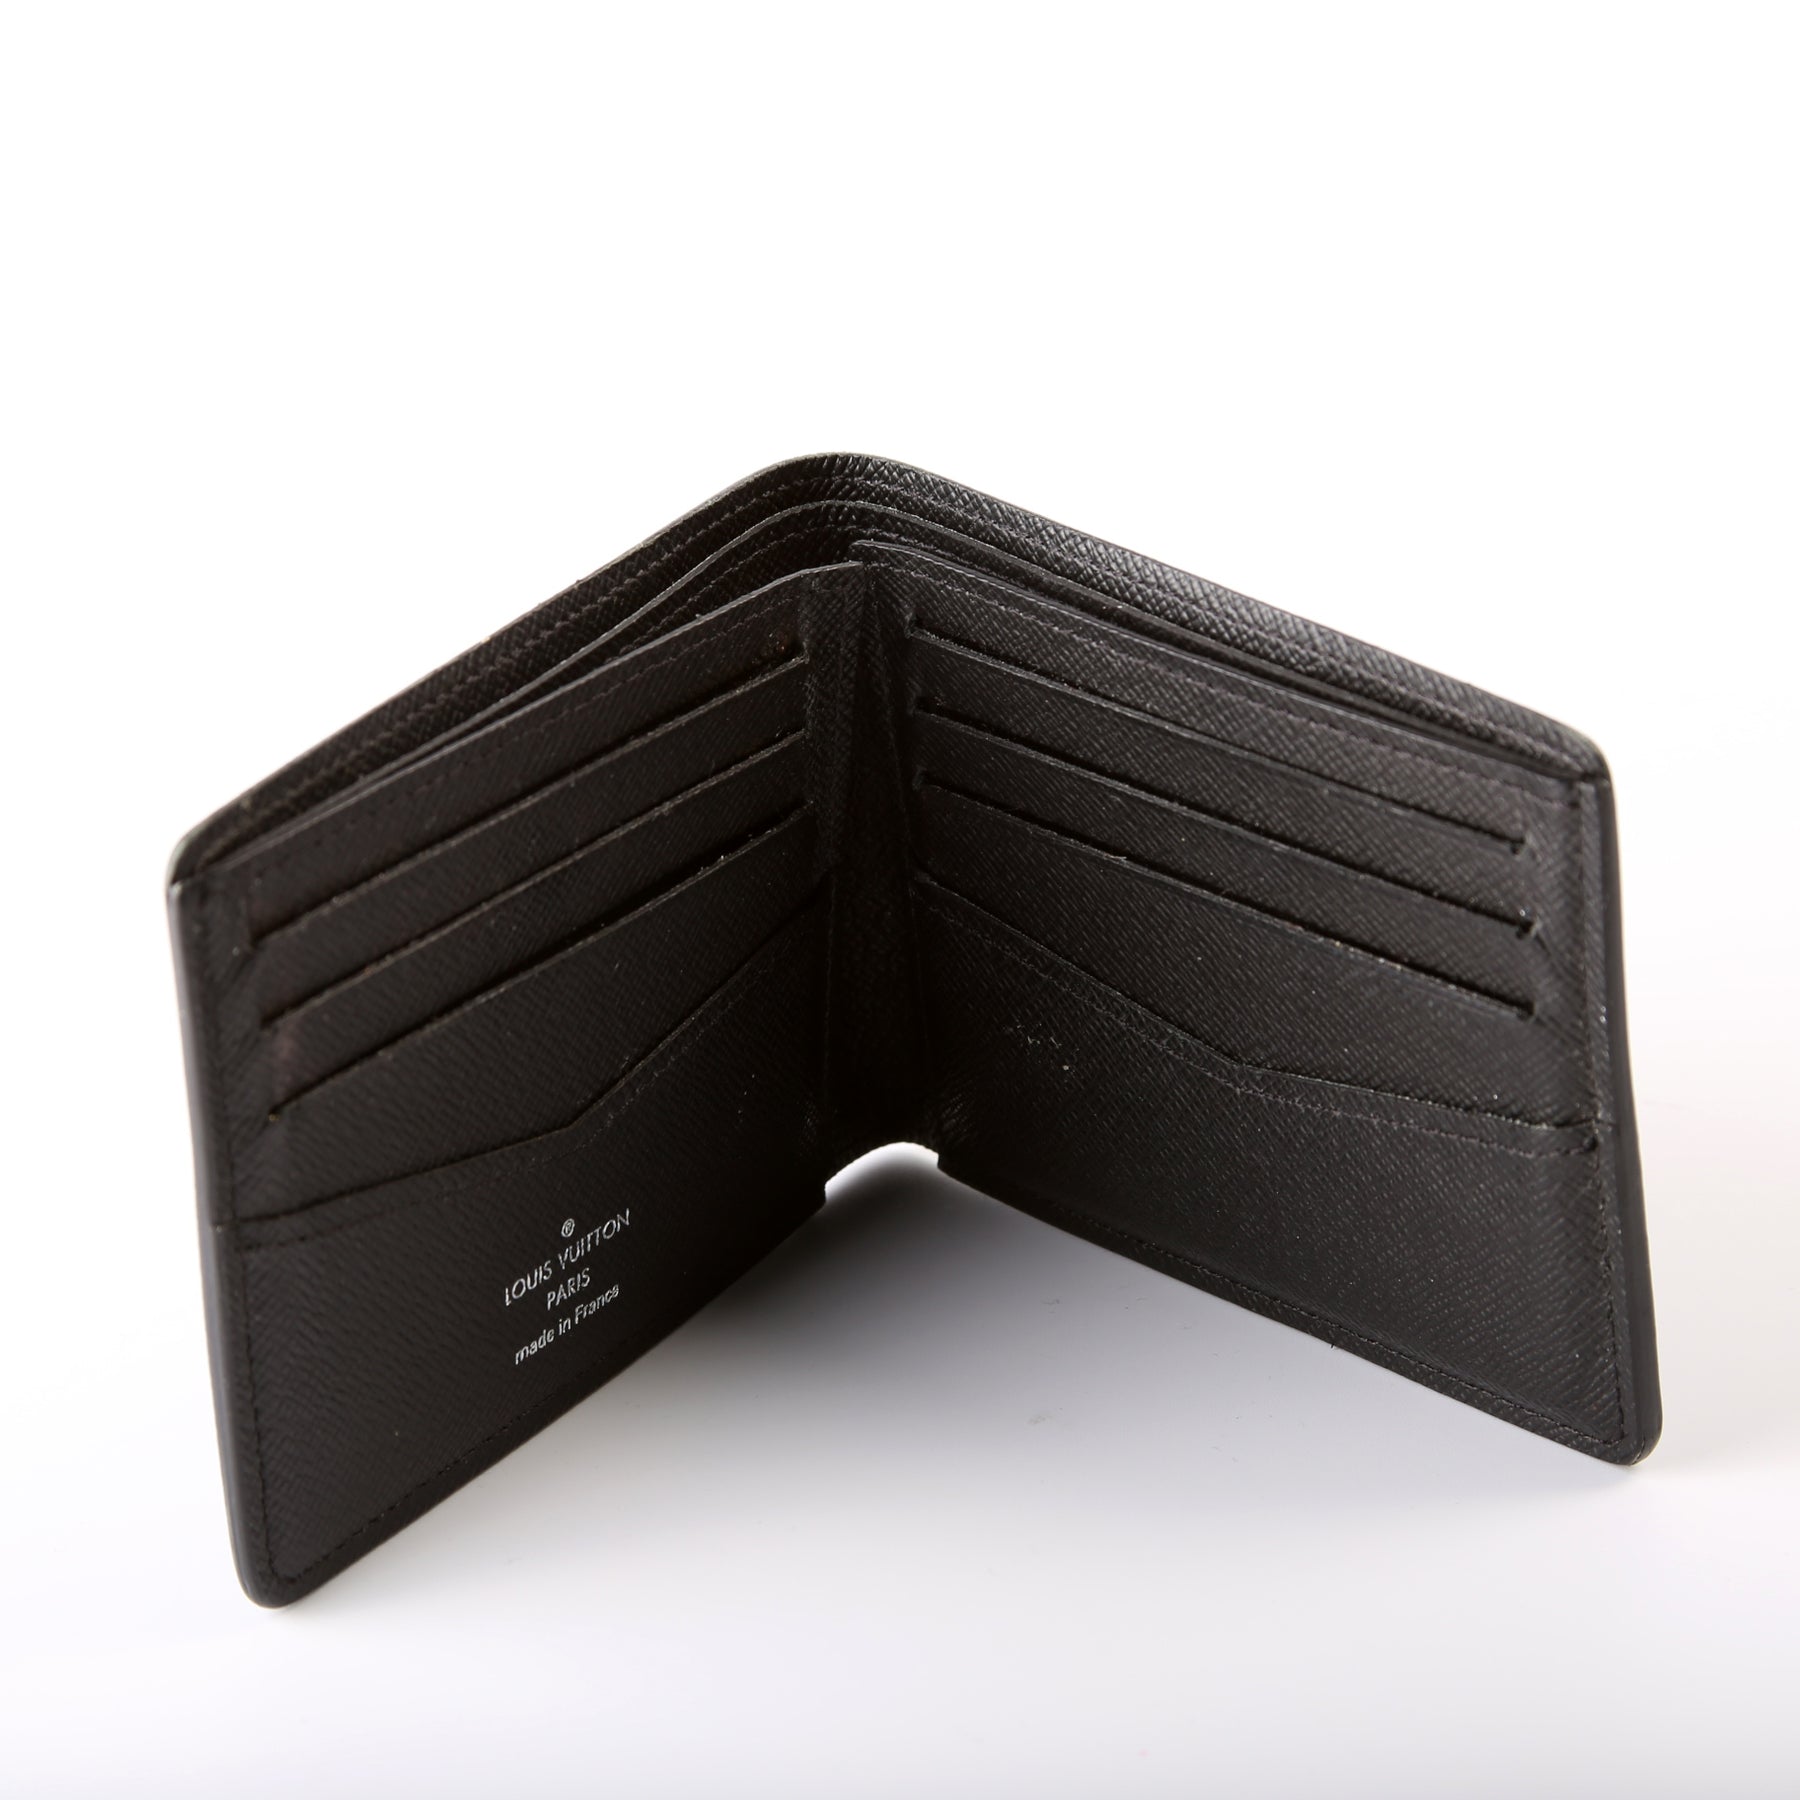 LV monogram slender wallet - does anyone know where I can find a 1